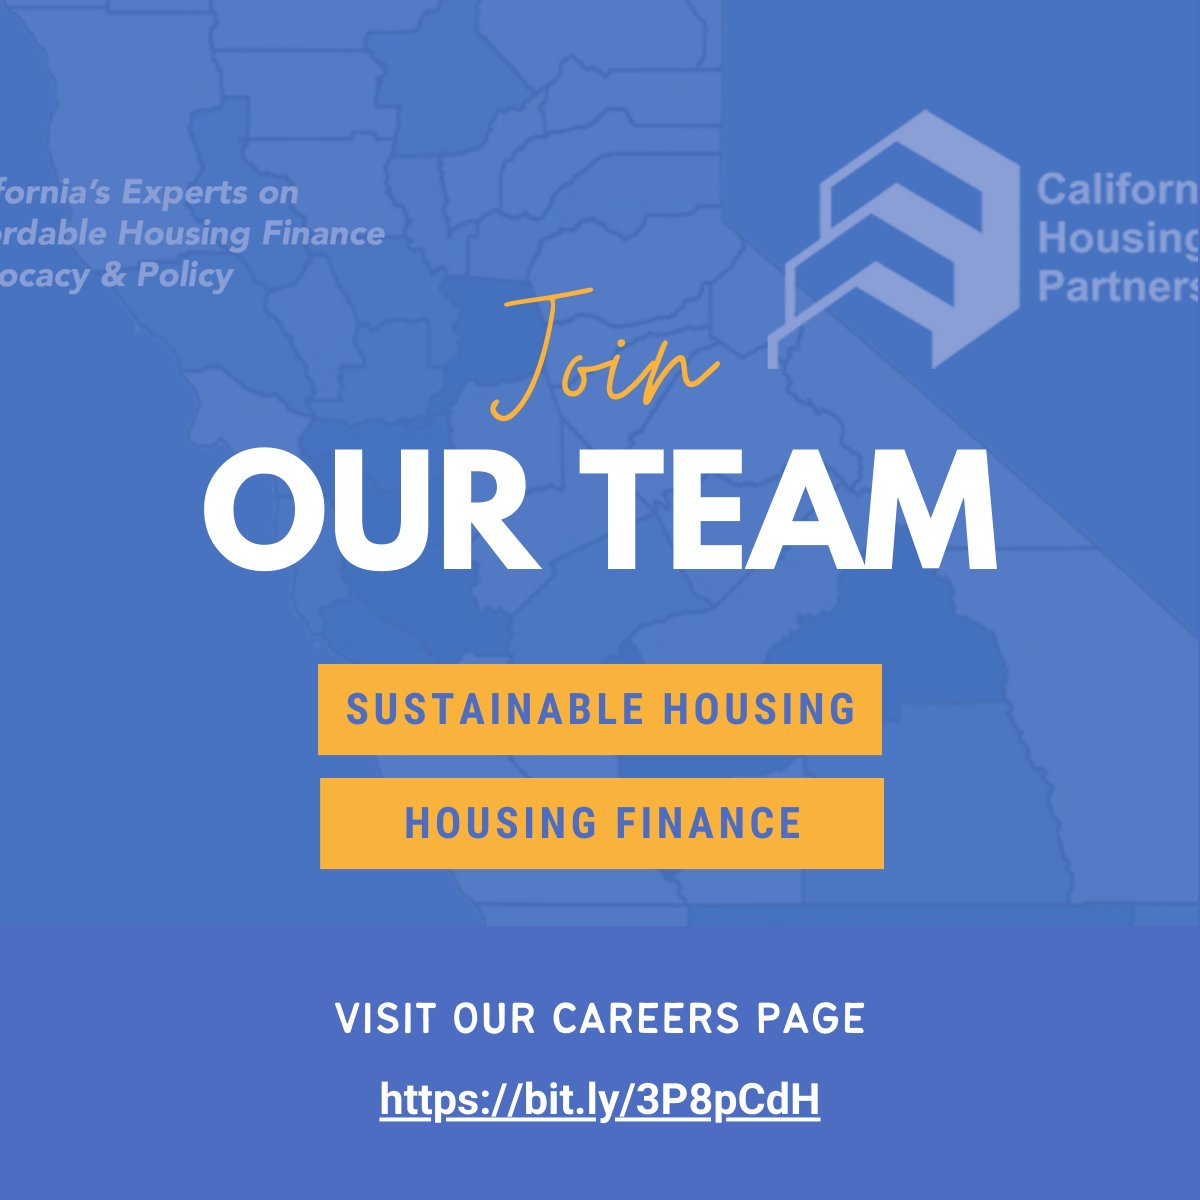 Looking for a way to contribute to the production & preservation of affordable & sustainable homes for low-income Californians? We welcome you! Check out open roles with our Sustainable Housing and Housing Finance teams here: bit.ly/3P8pCdH